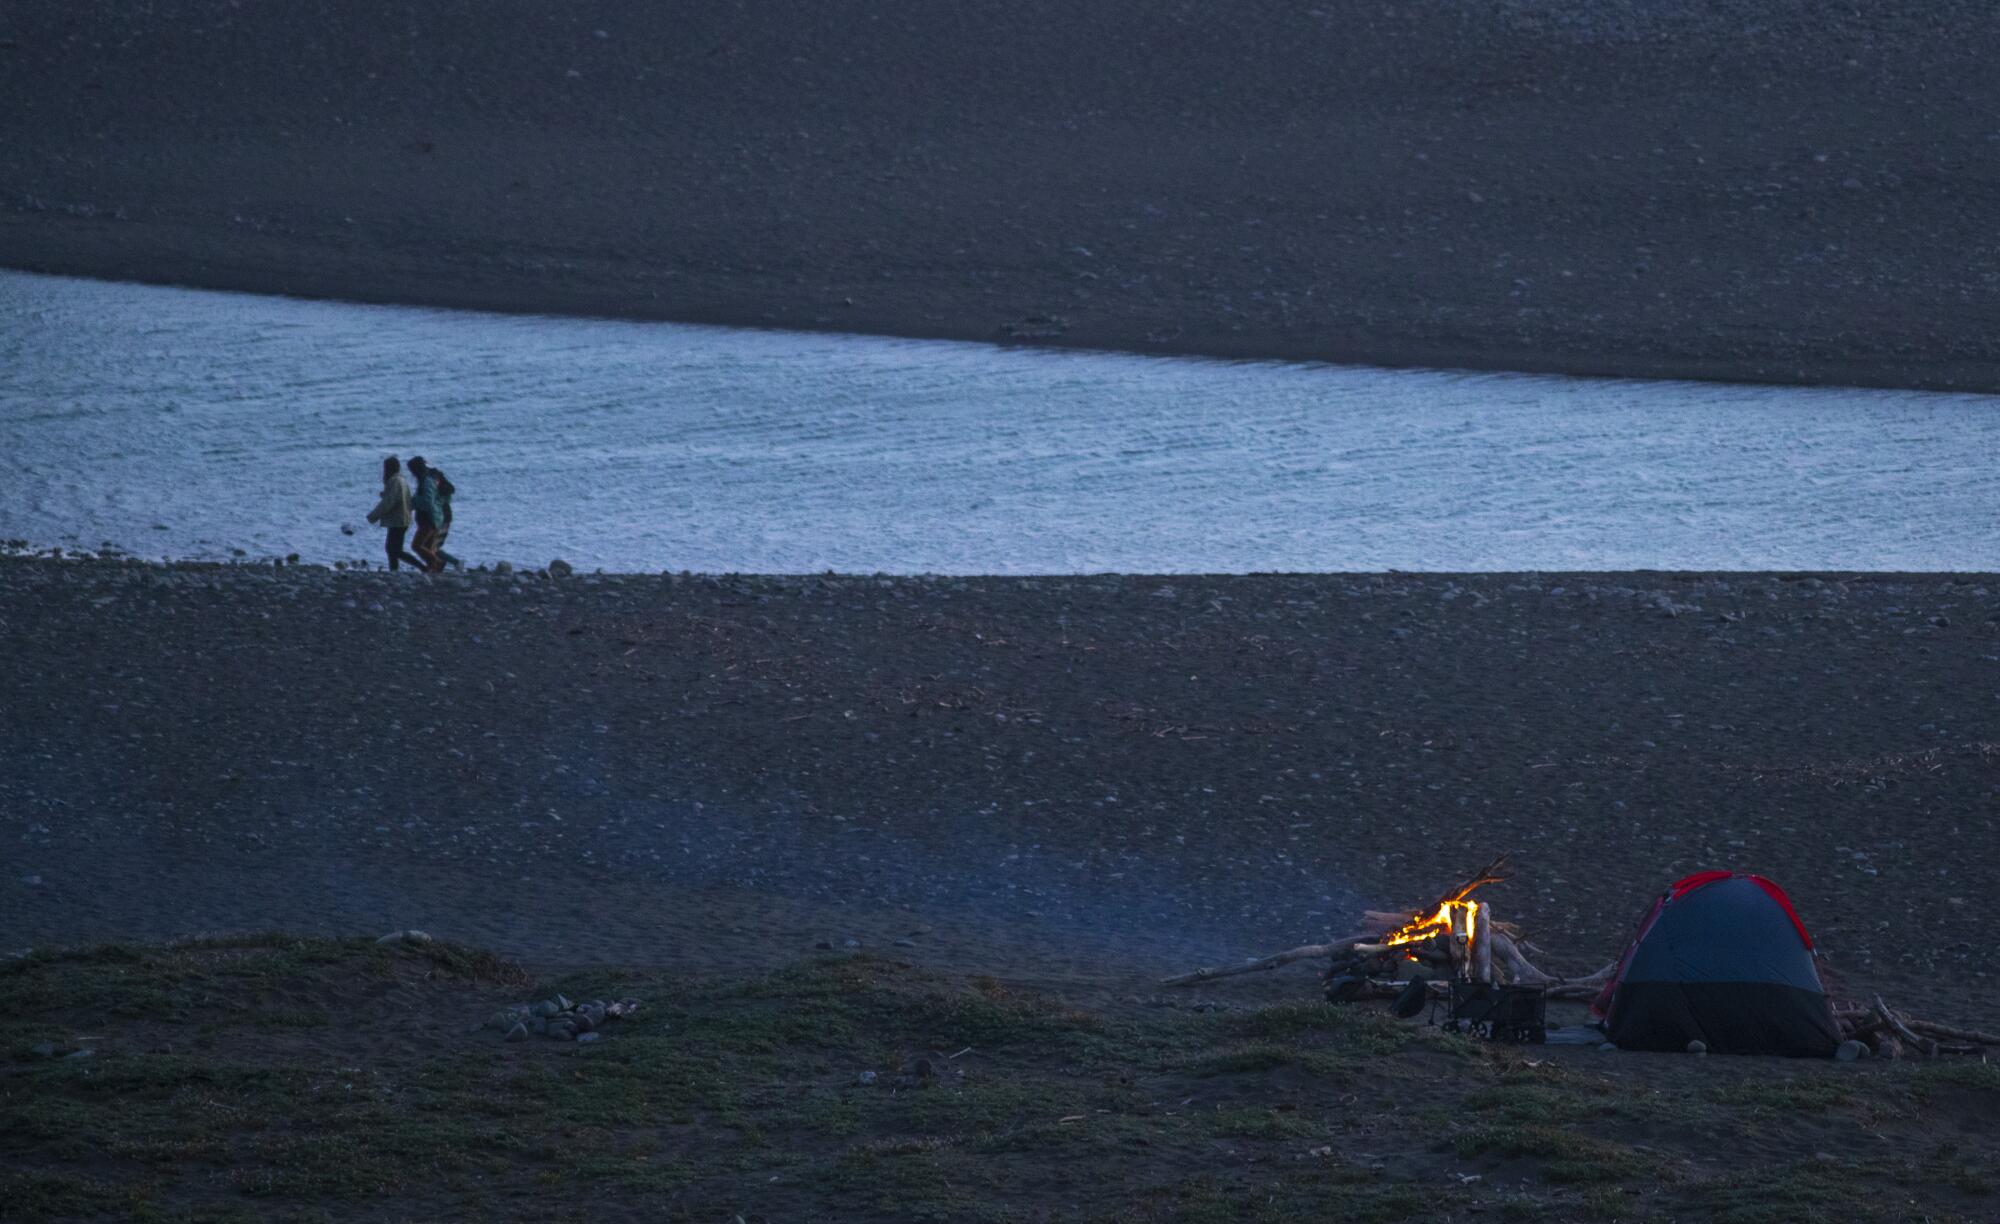 People are seen on a flat, wide, rocky beach at dusk; in the foreground a campfire burns next to a small tent.